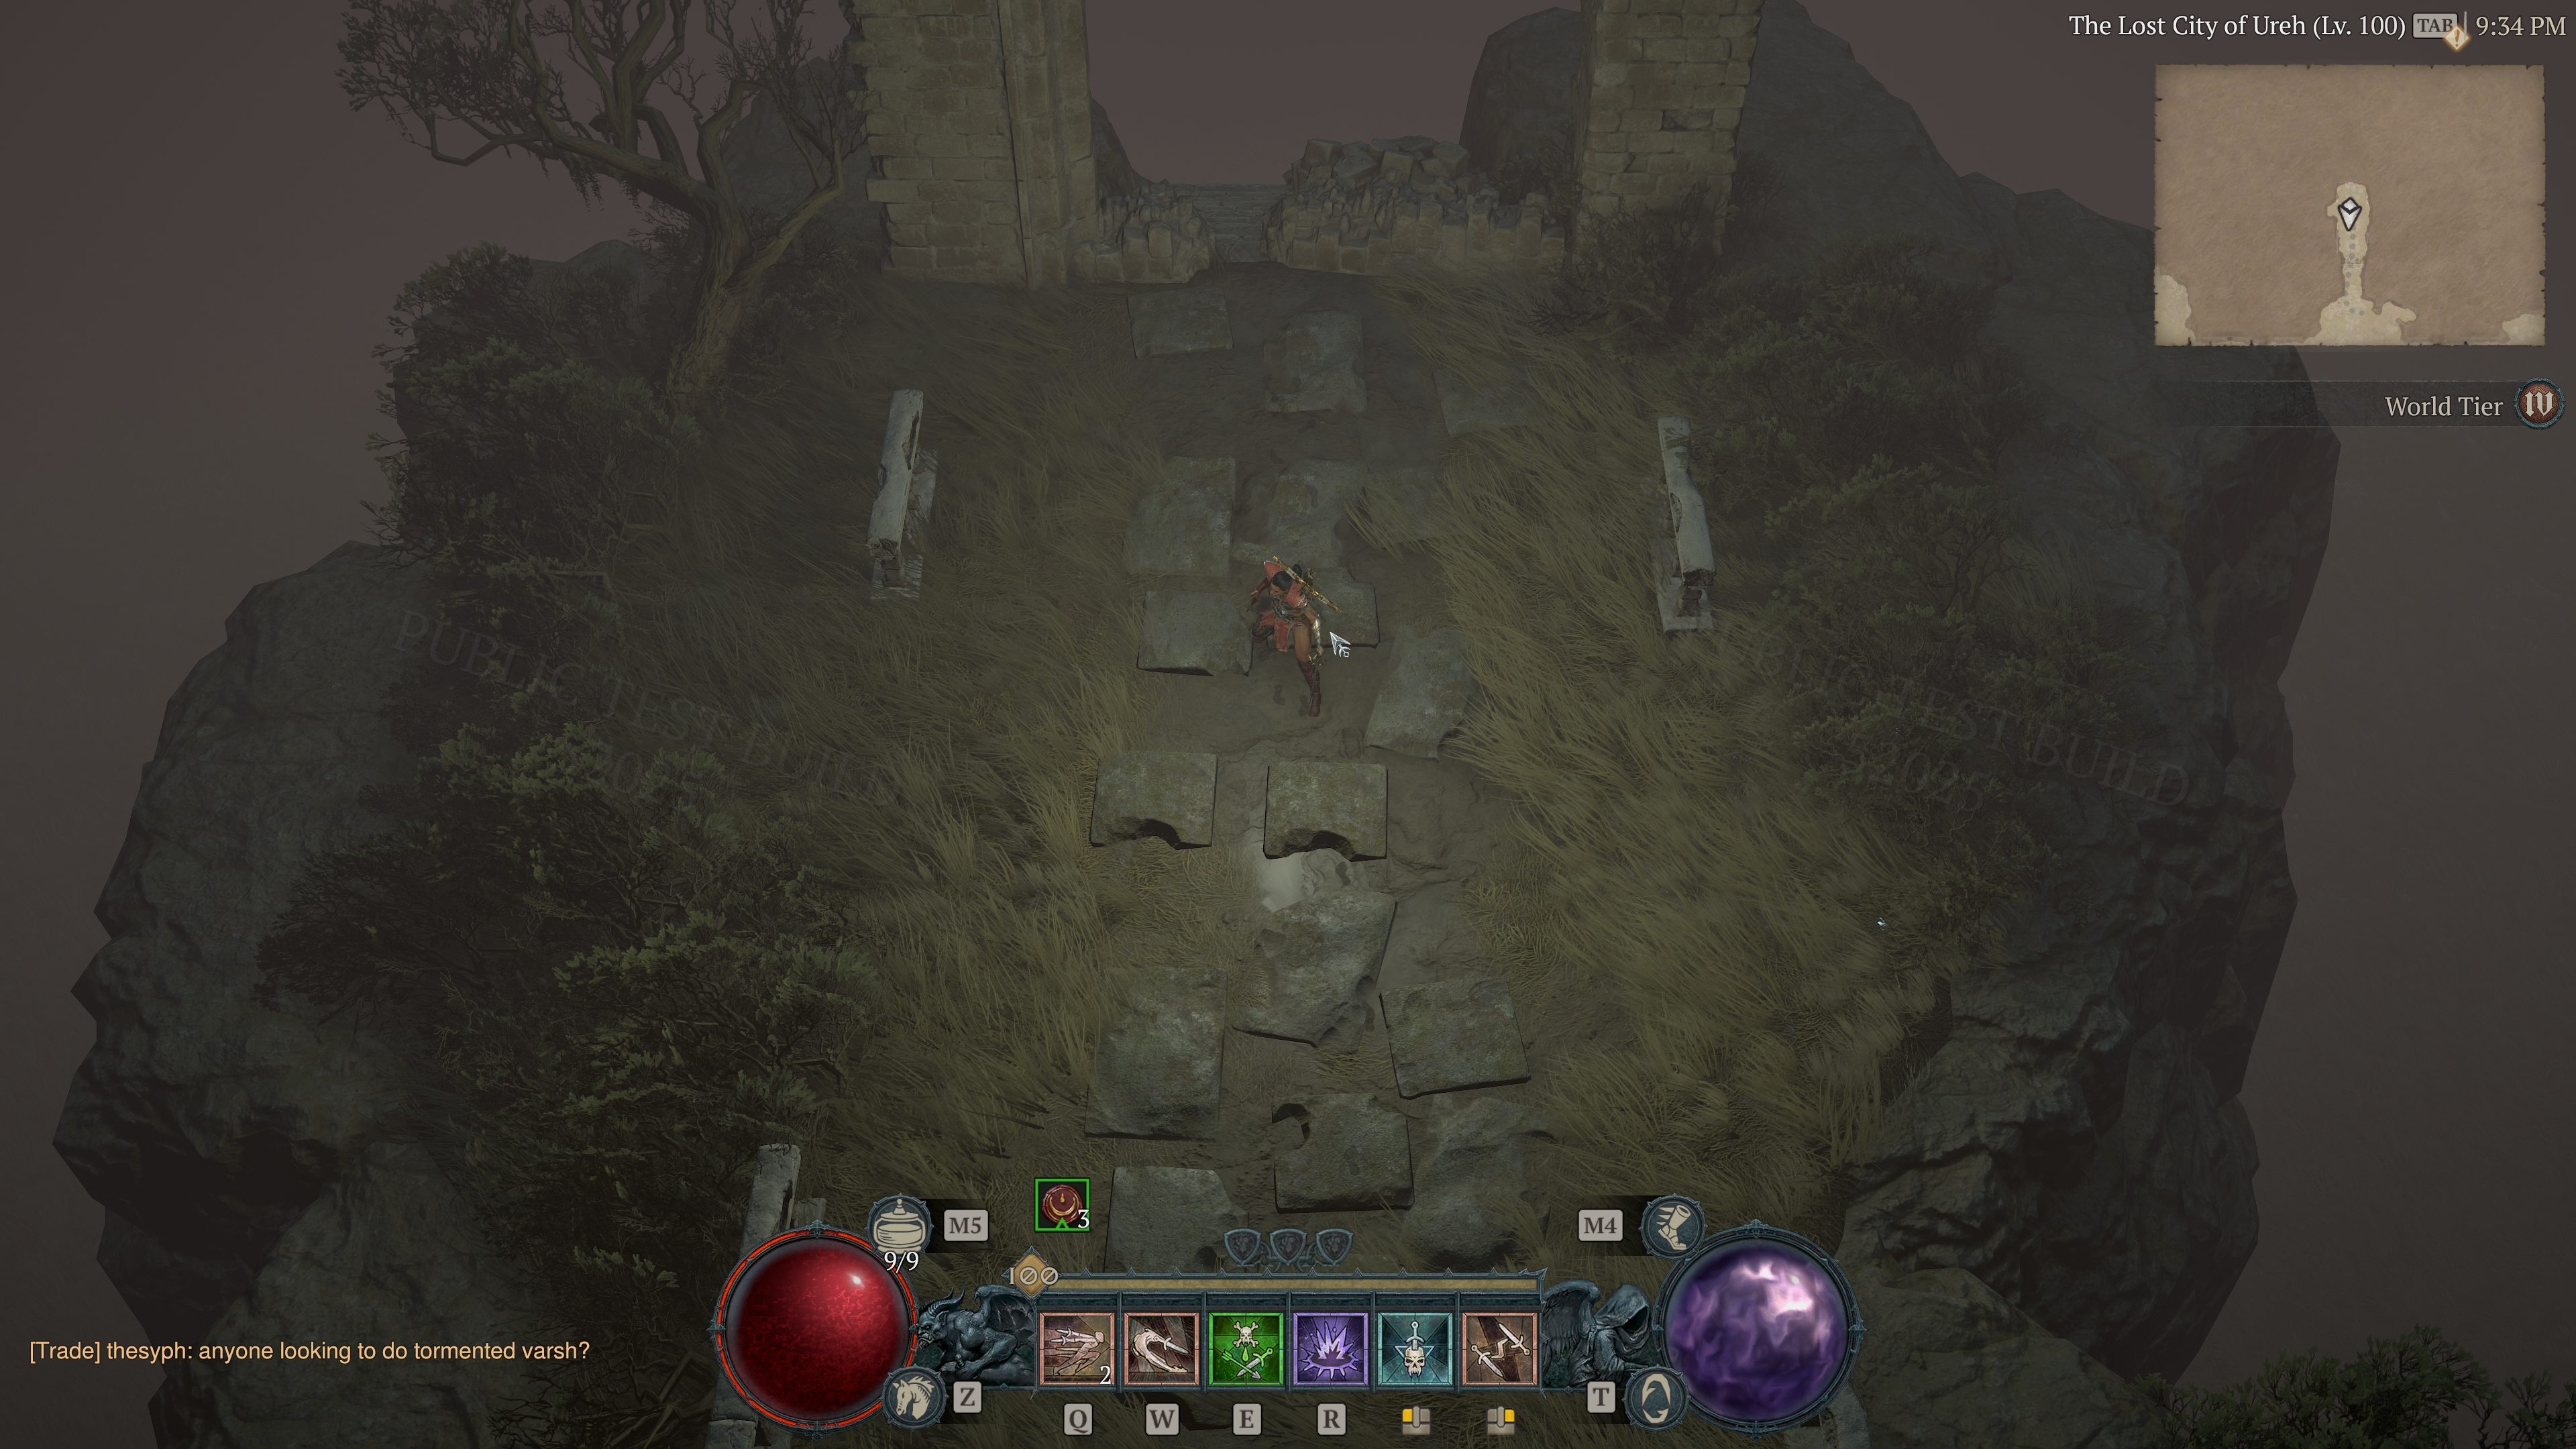 Diablo 4 screenshot of a rogue standing on a stone path near the Lost City of Ureh.